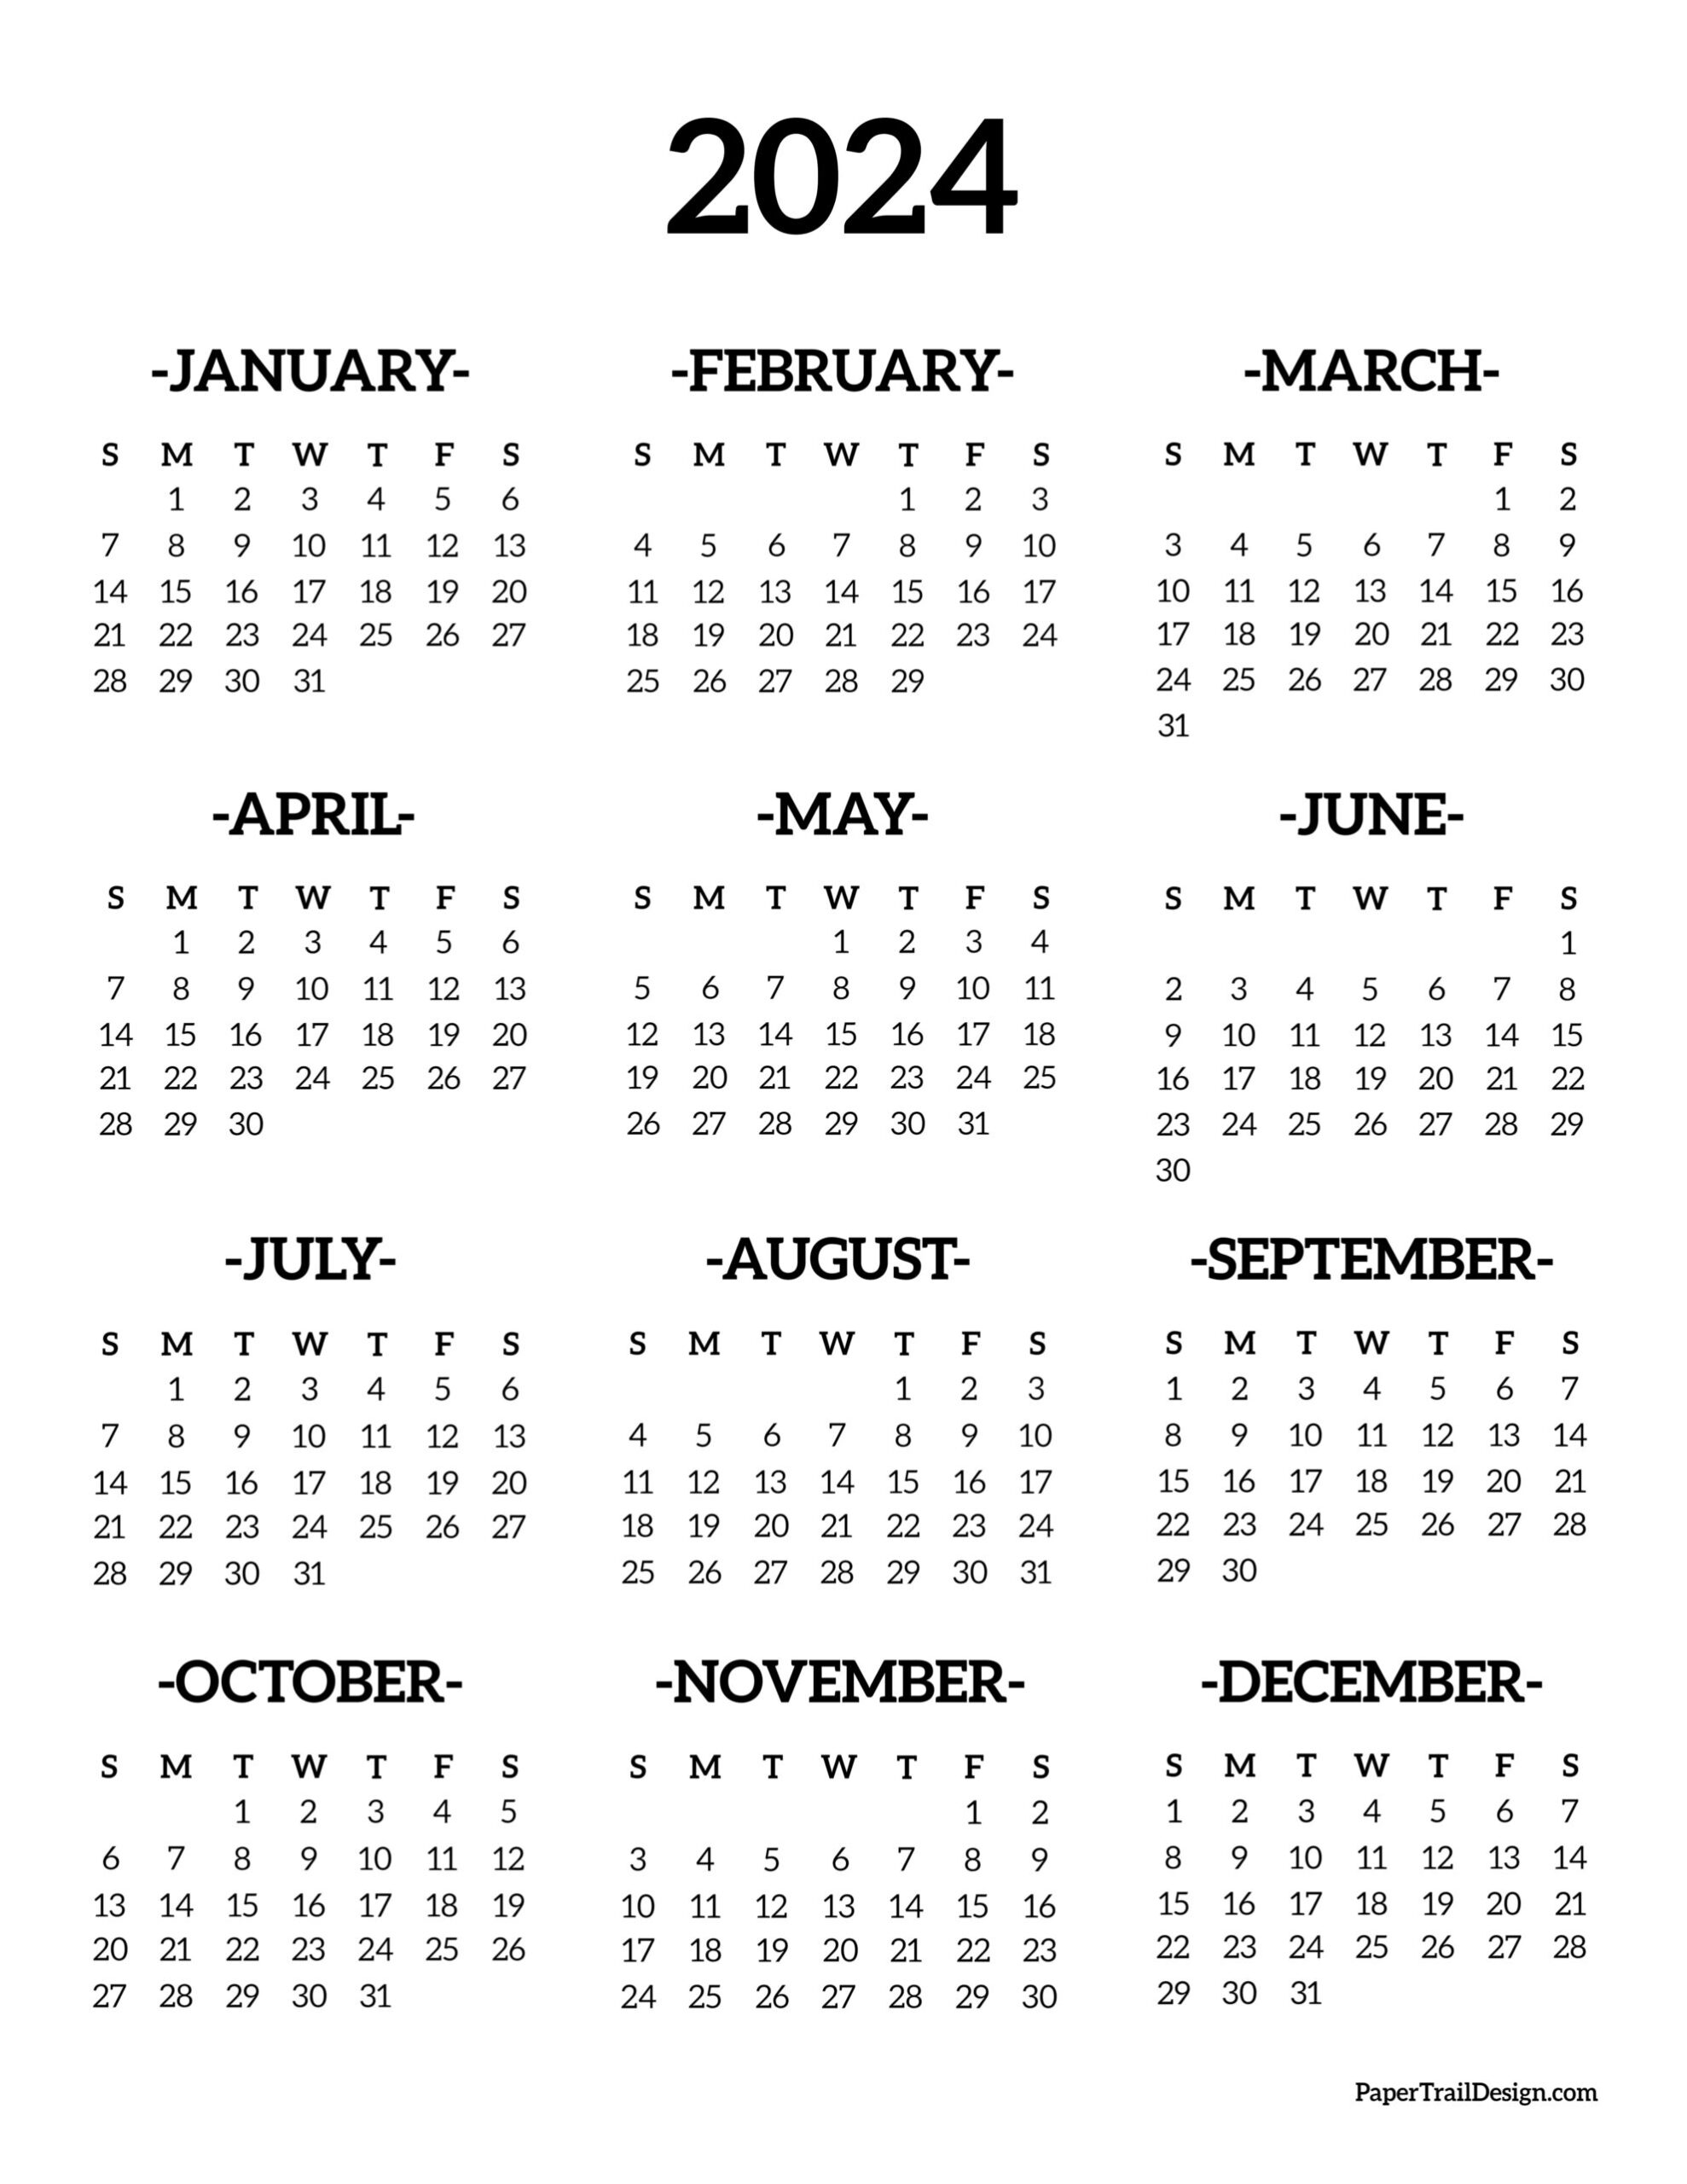 Calendar 2024 Printable One Page - Paper Trail Design for Printable Month At A Glance Calendar 2024